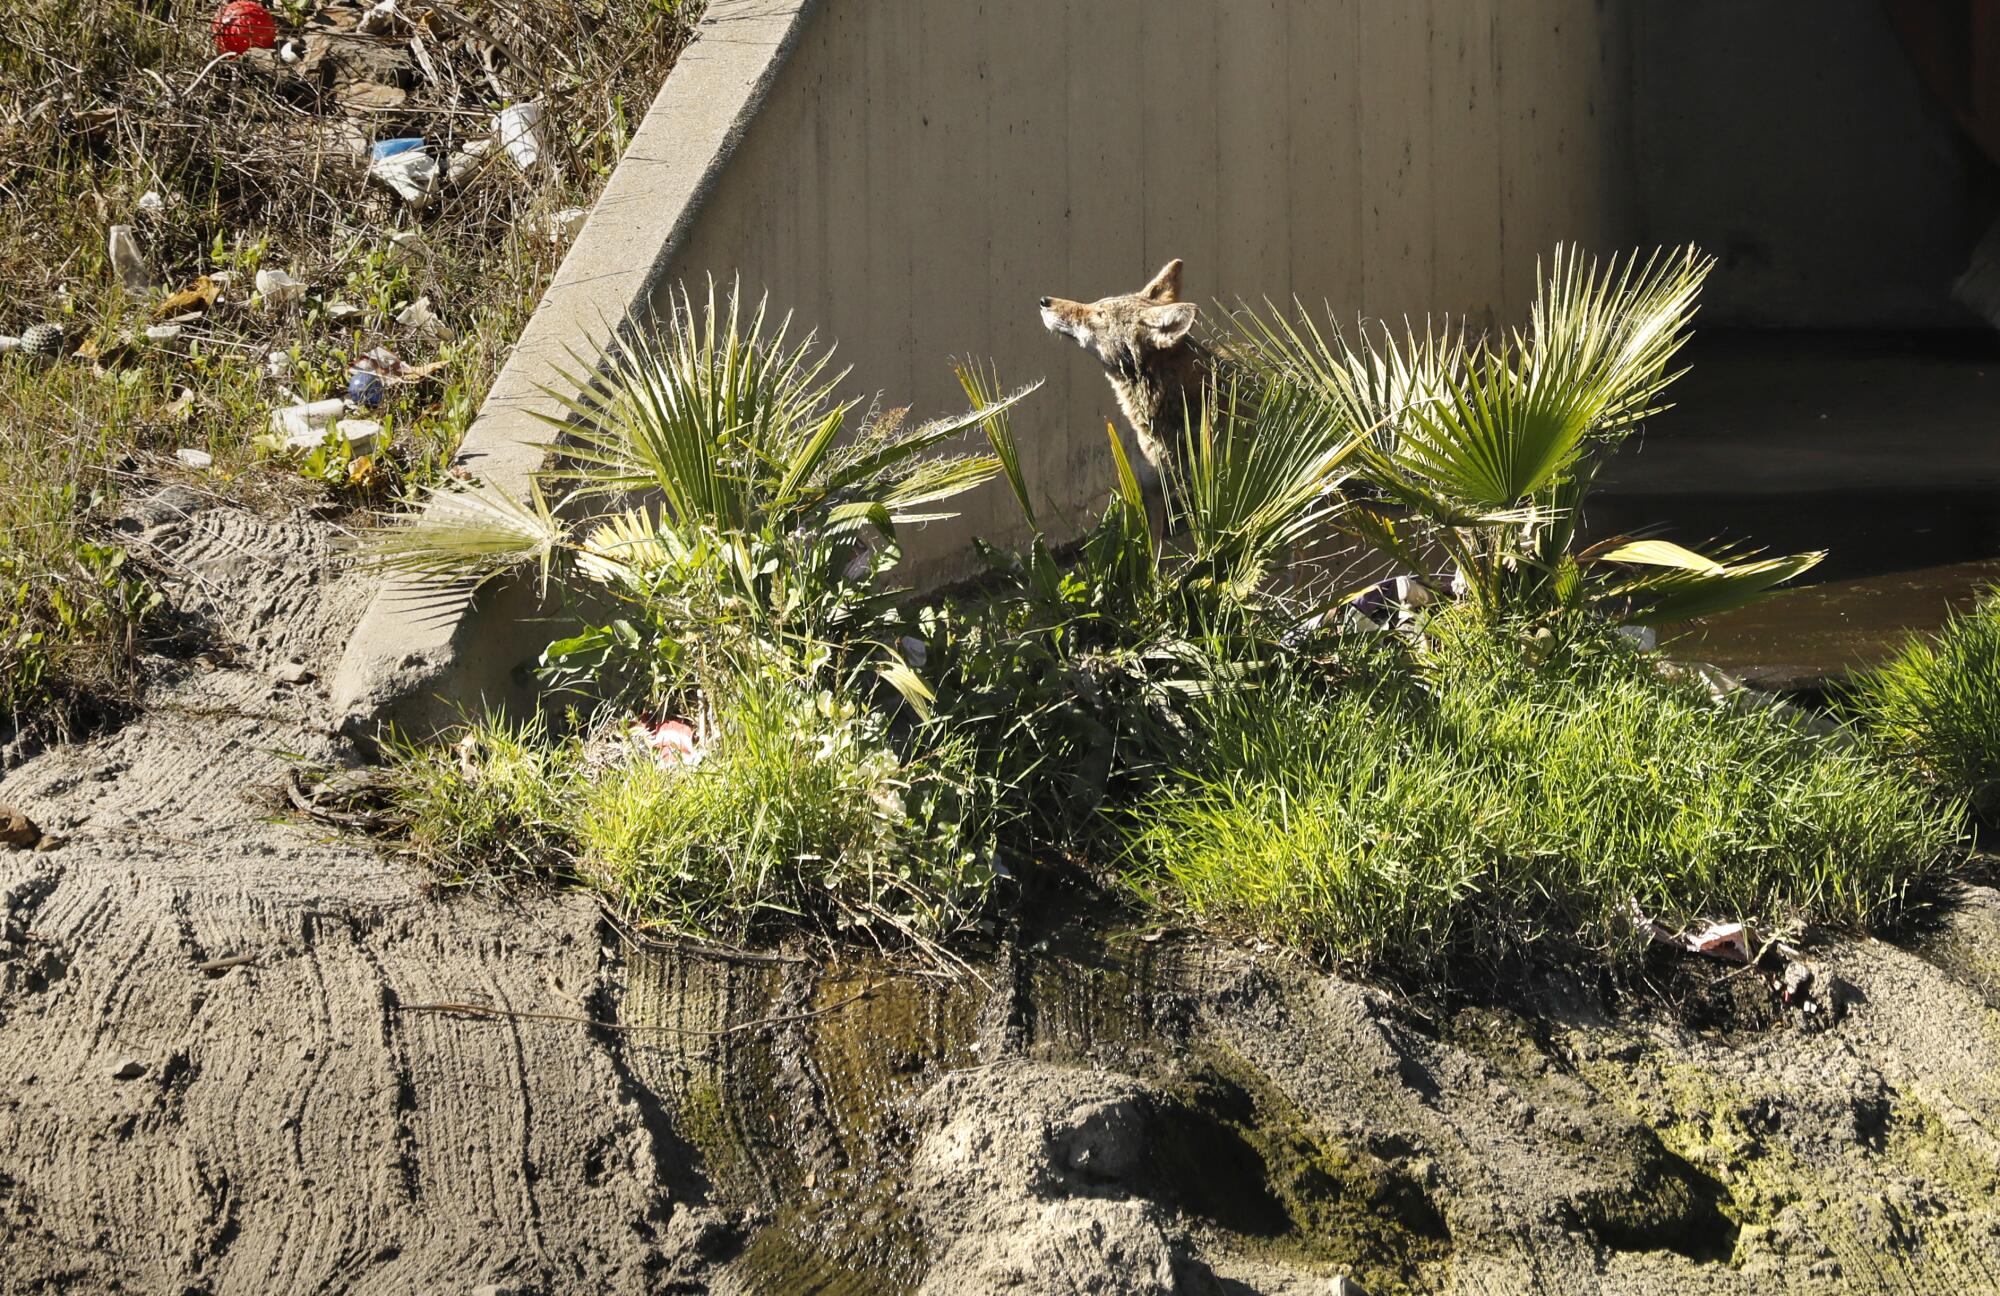 A coyote's head rises from behind a small palm plant in a trash-strewn landscape